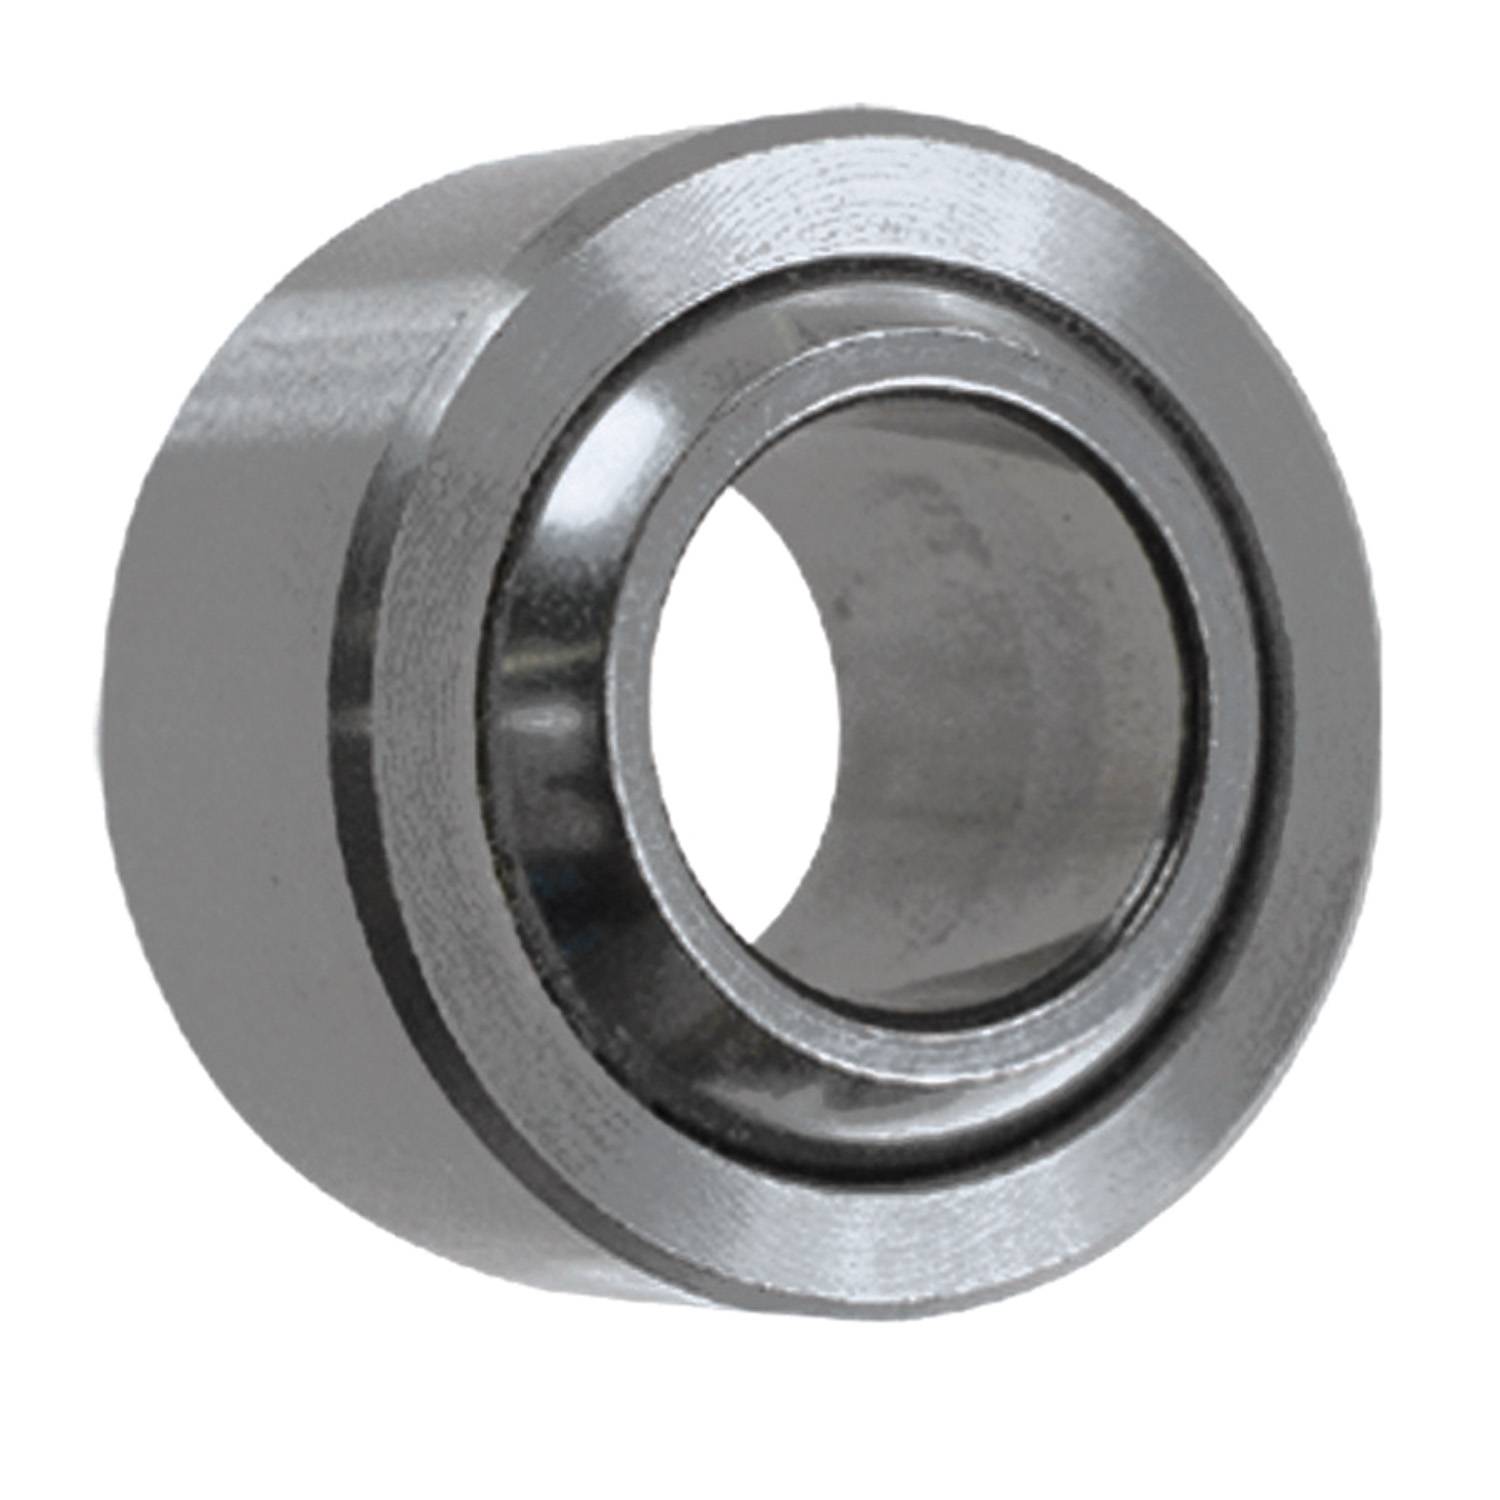 1.1875 in Bore 2.3750 in OD QA1 Precision Products HCOM19TKH Spherical Plain Bearing No Seals Commercial Grade 1.1870 in Width PTFE Spherical Plain Bearing 